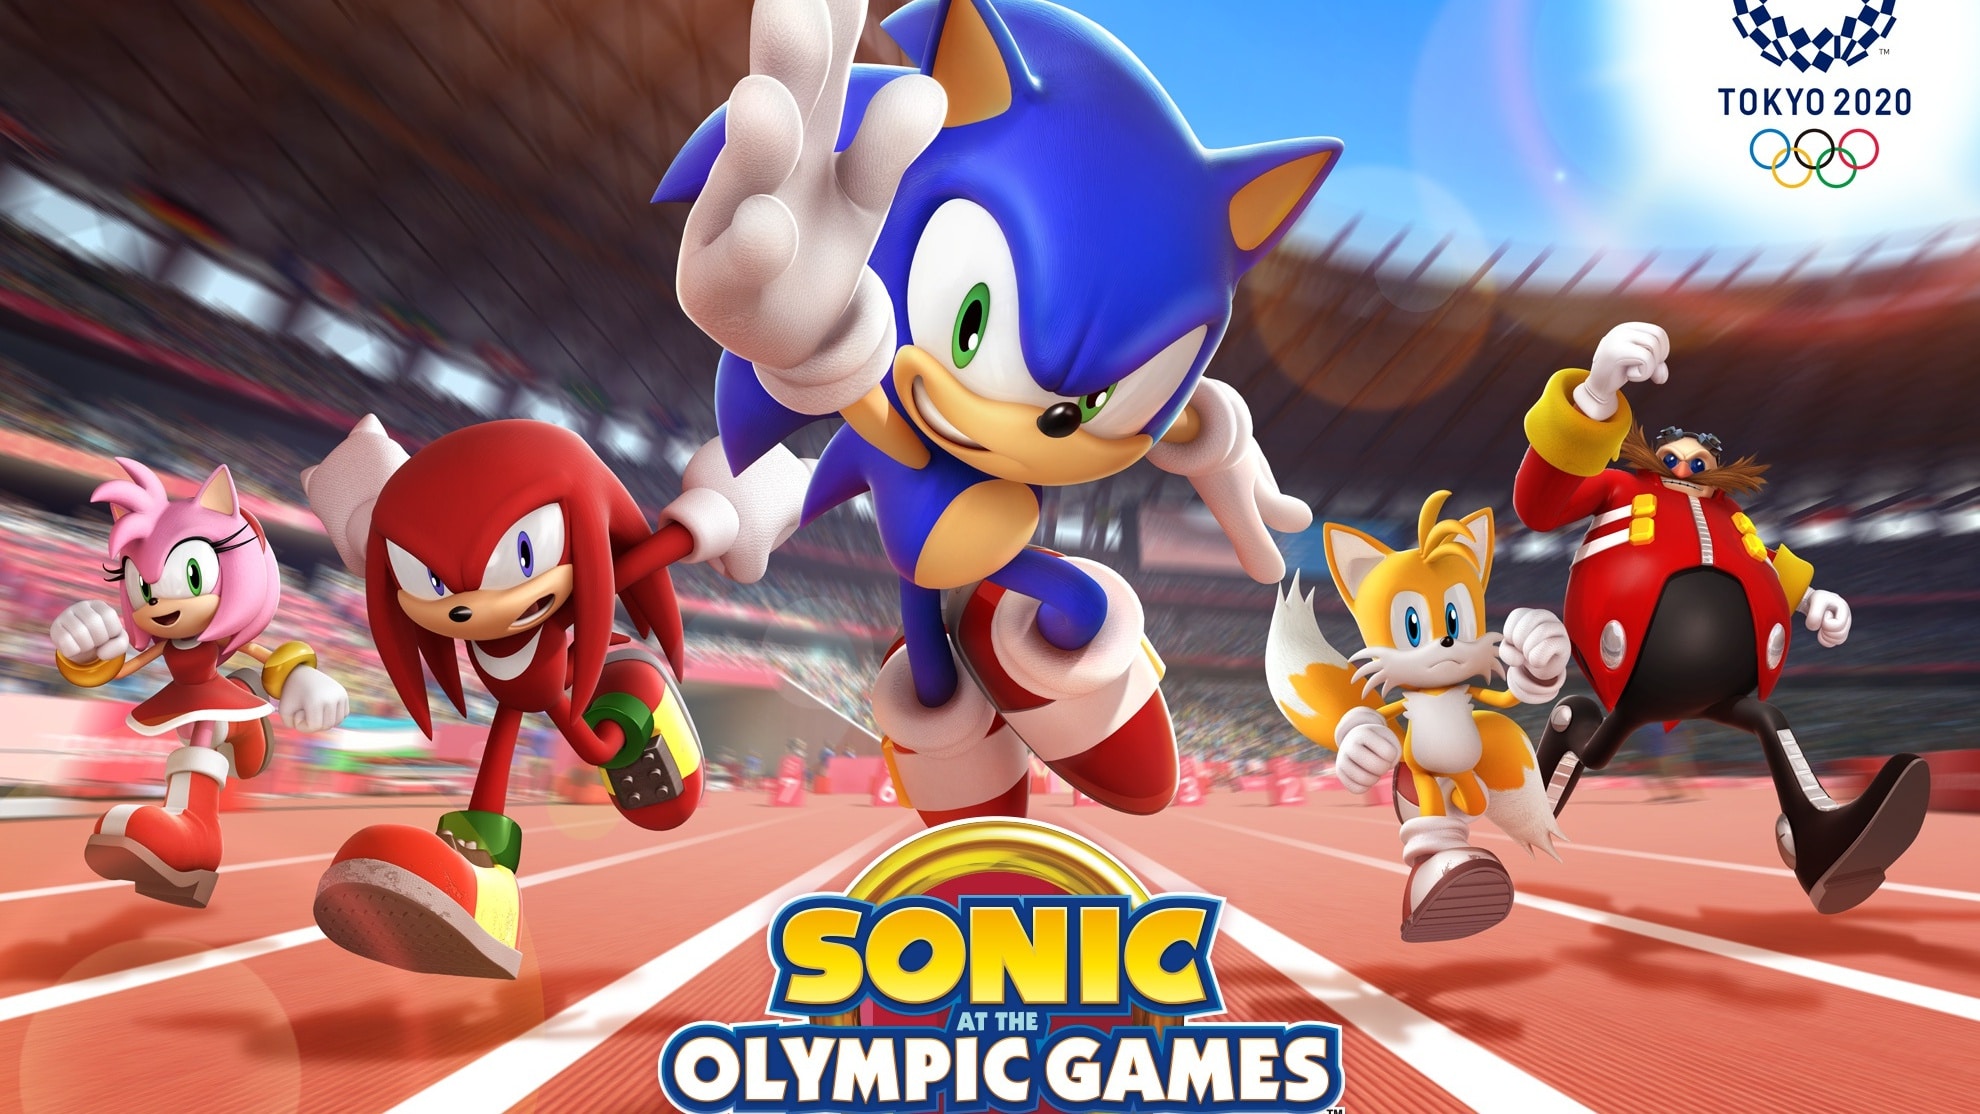 sonic at the Olympic Games - Tokyo 2020